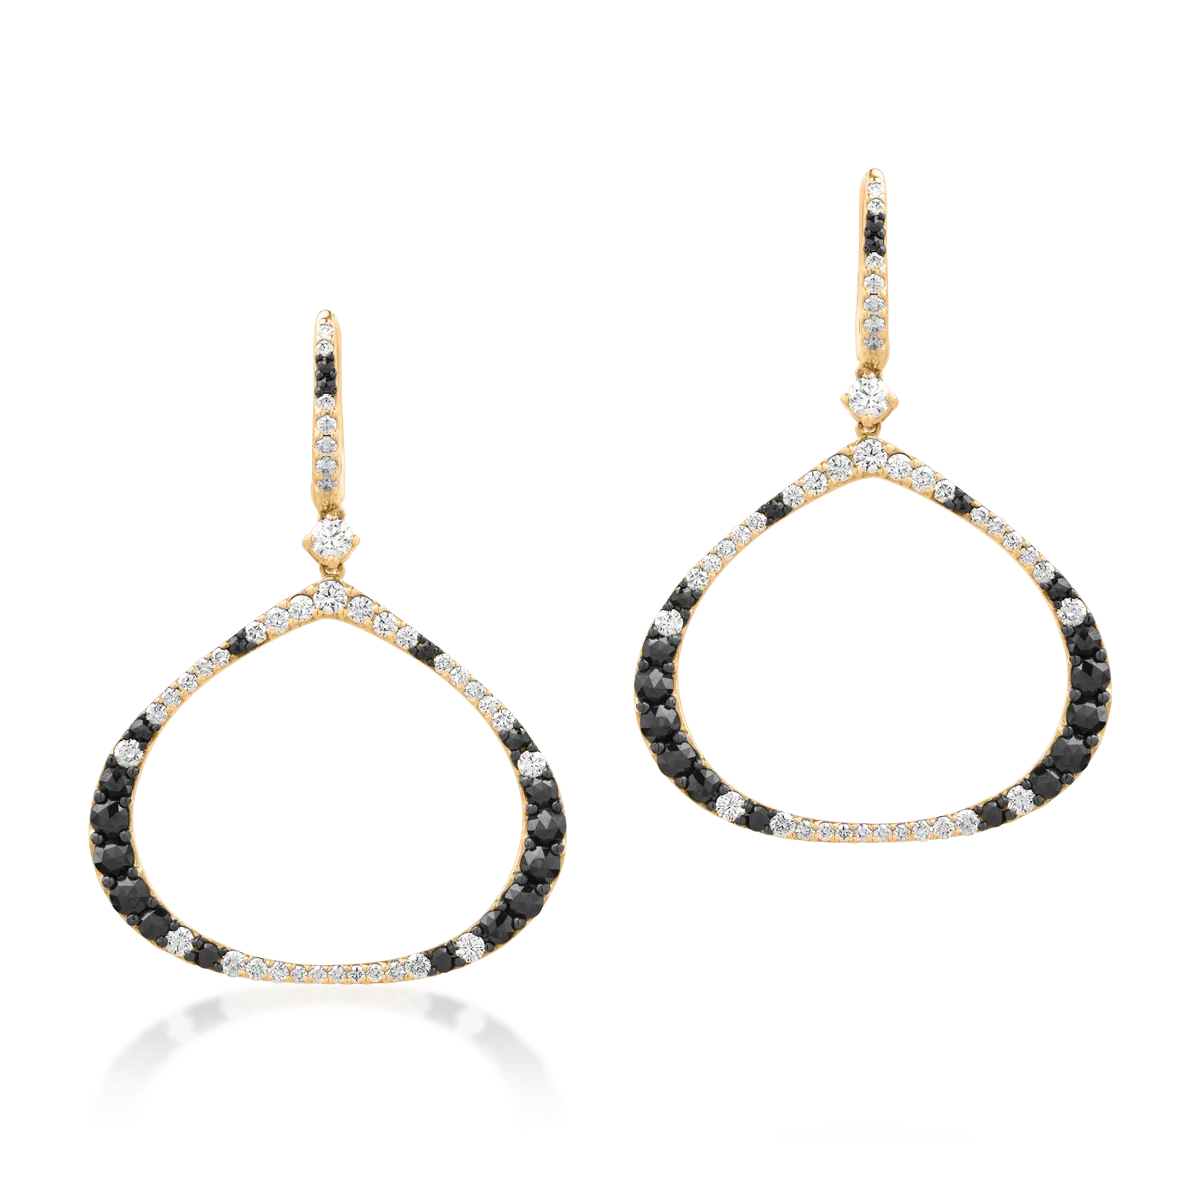 18K yellow gold earrings with 1.62ct black diamonds and 1.41ct white diamonds